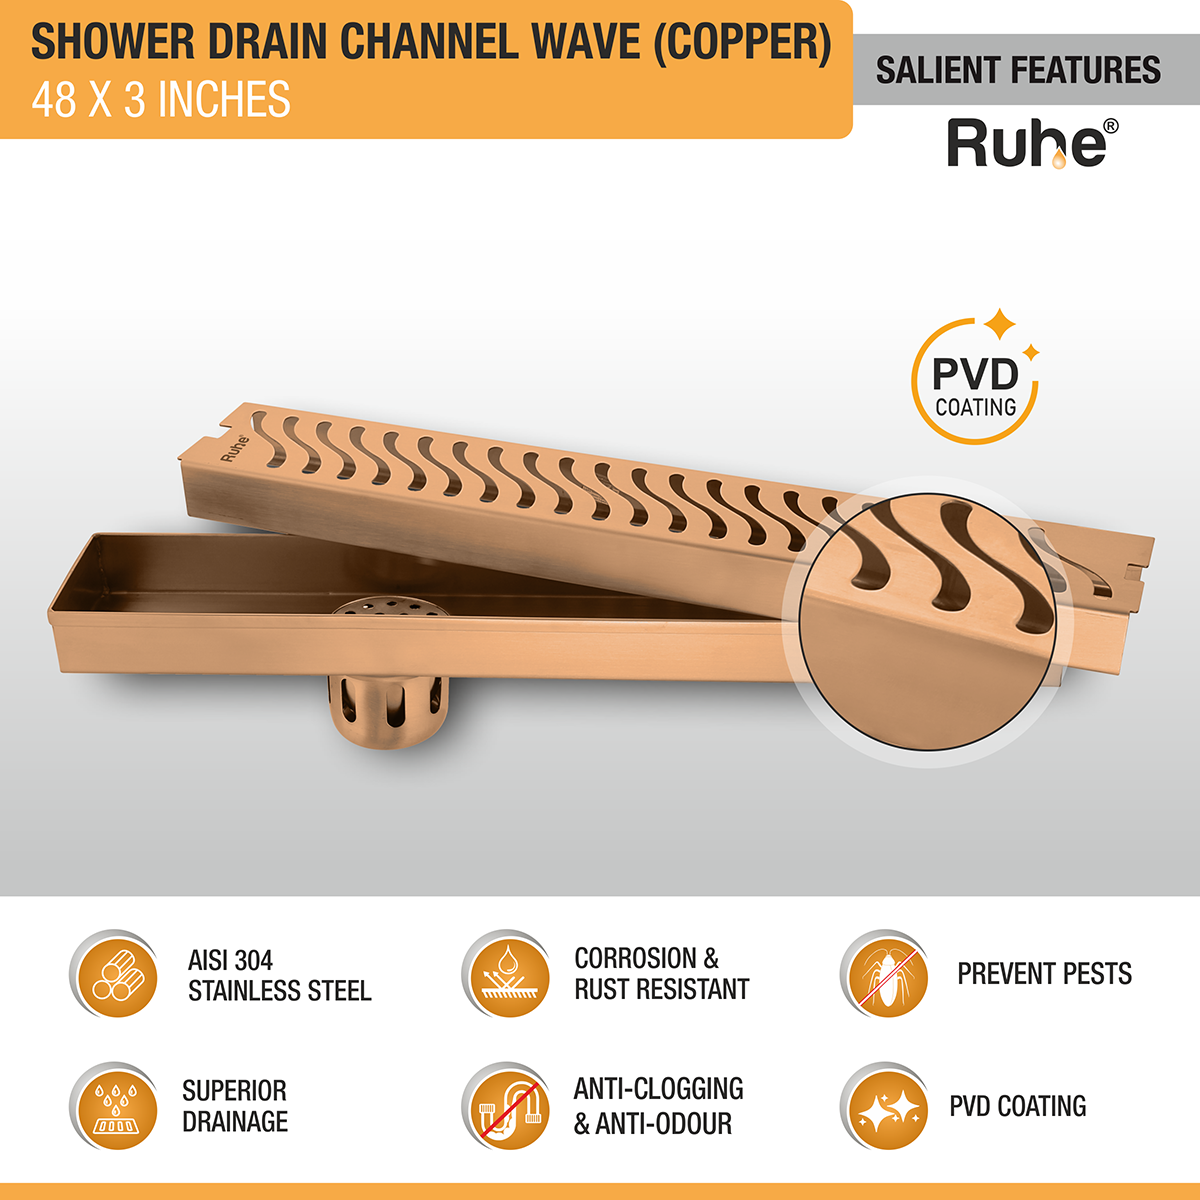 Wave Shower Drain Channel (48 x 3 Inches) ROSE GOLD/ANTIQUE COPPER features